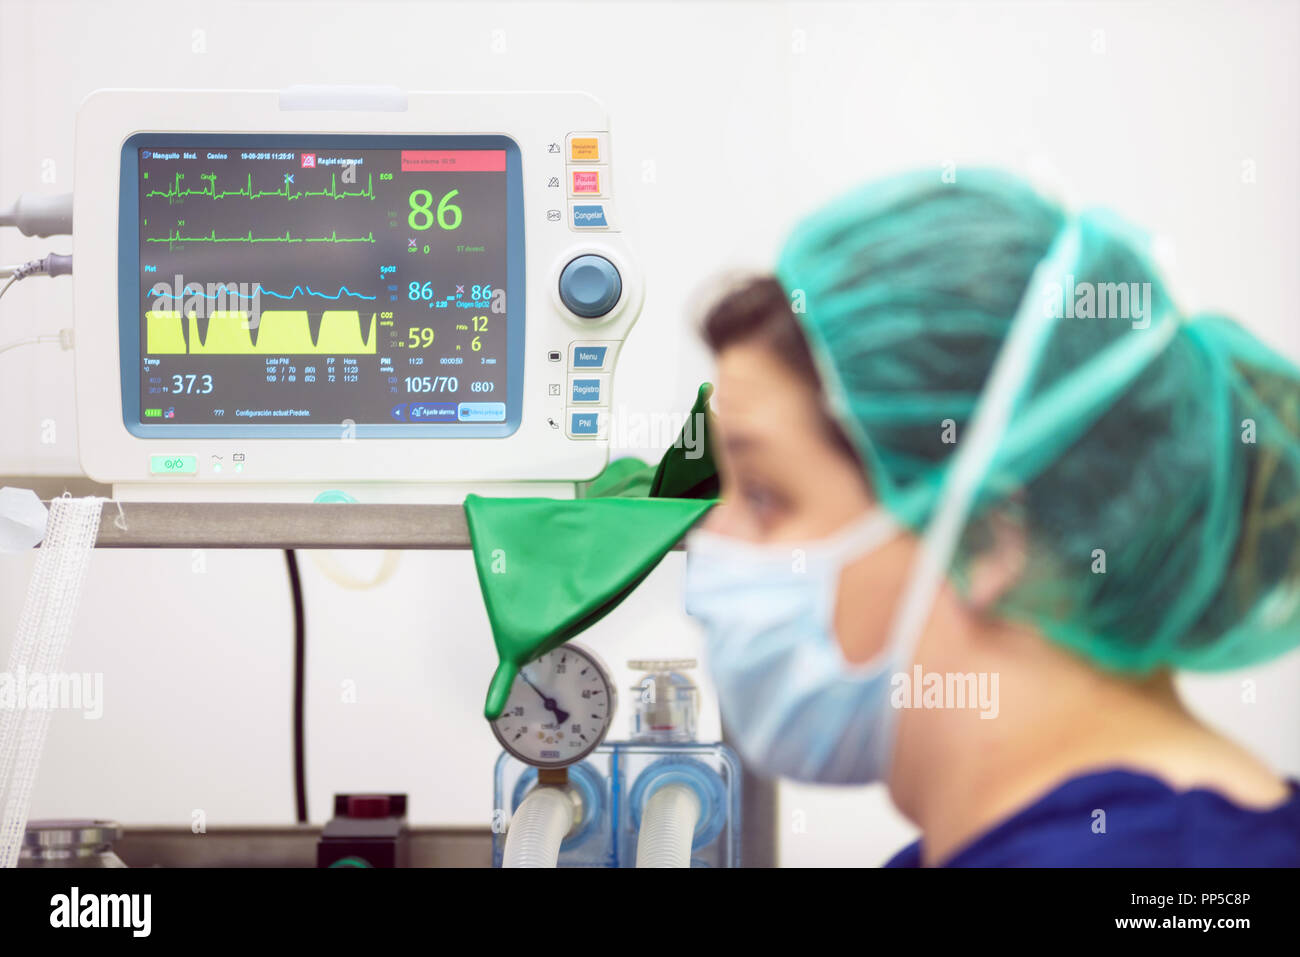 Veterinarian doctor portrait in operating room. Anesthesia monitoring in the background Stock Photo